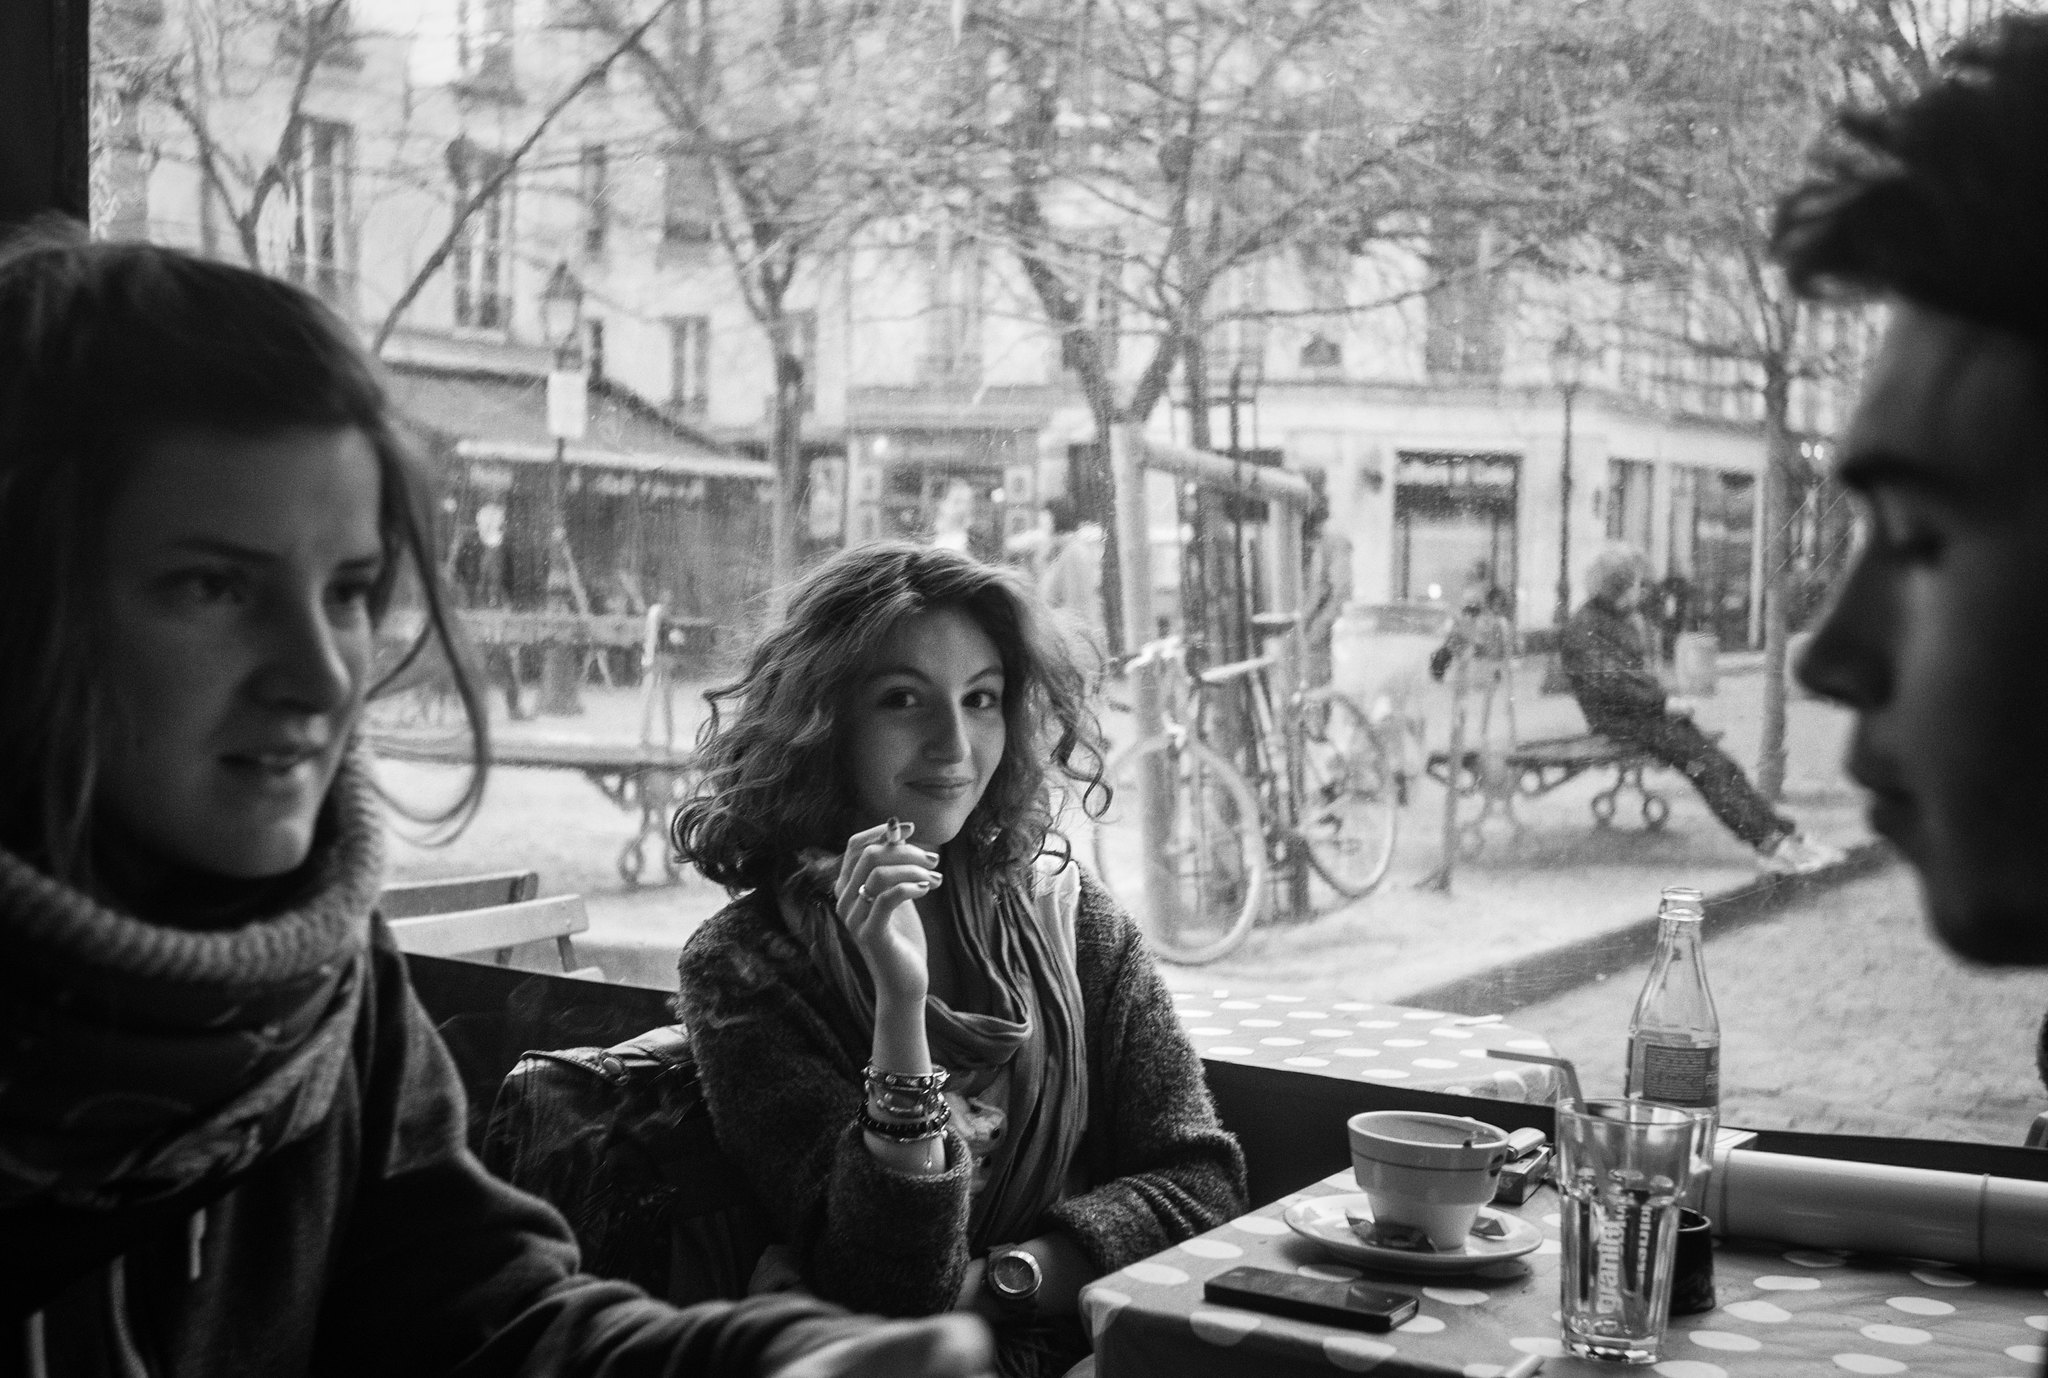 Candid shot of a French girl enjoying a cigarette in a Paris café ...